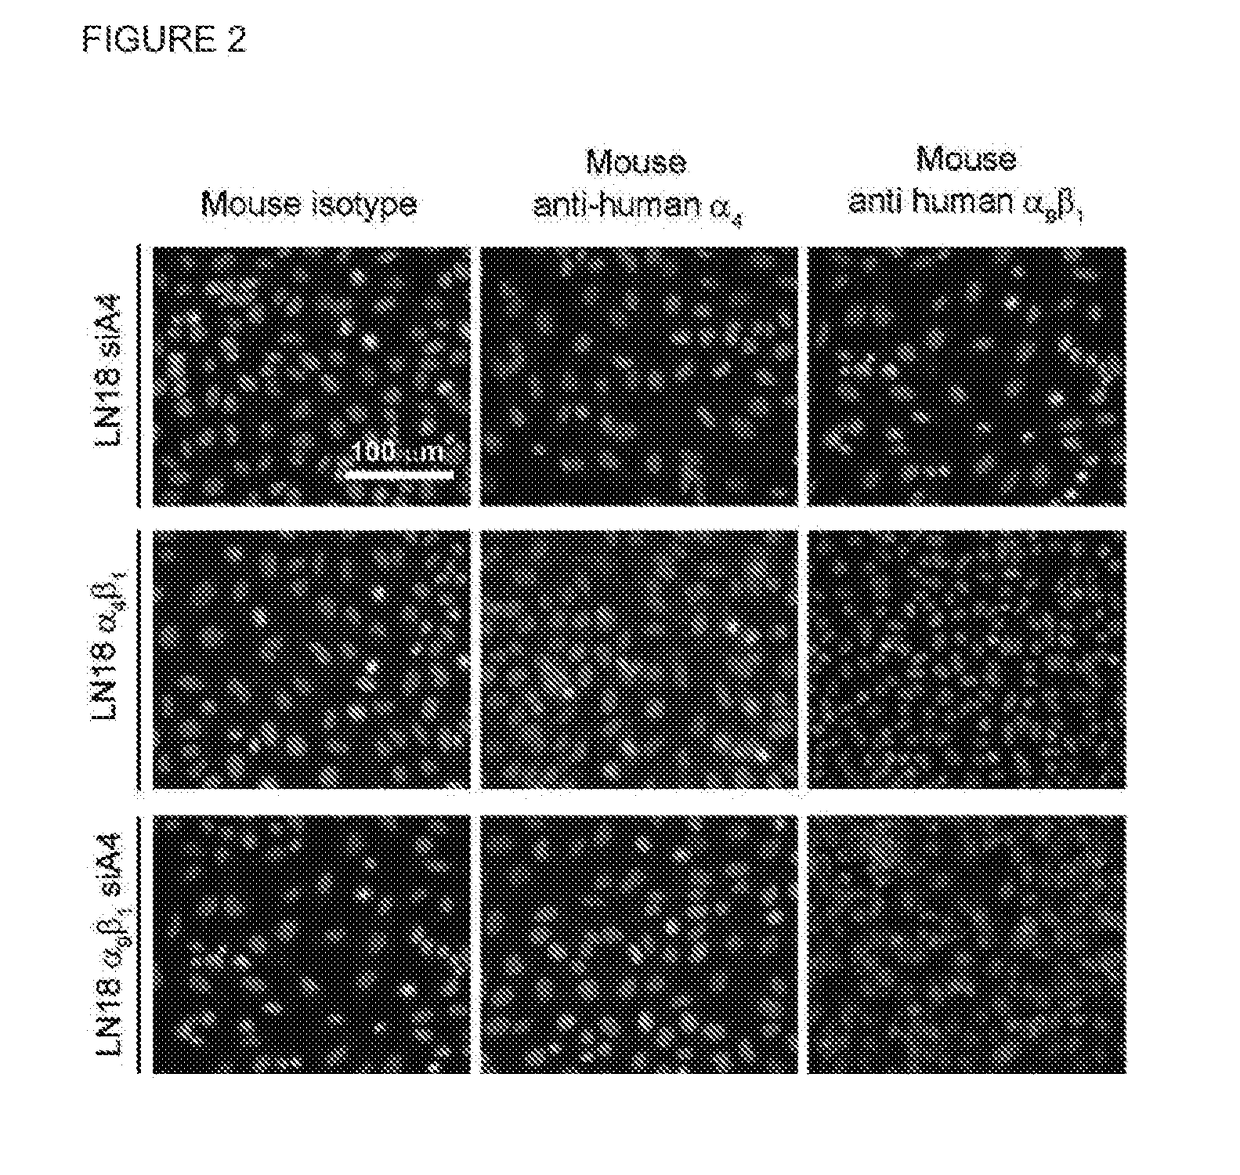 Dislodgement and release of hsc from the bone marrow stem cell niche using alpha9 integrin antagonists